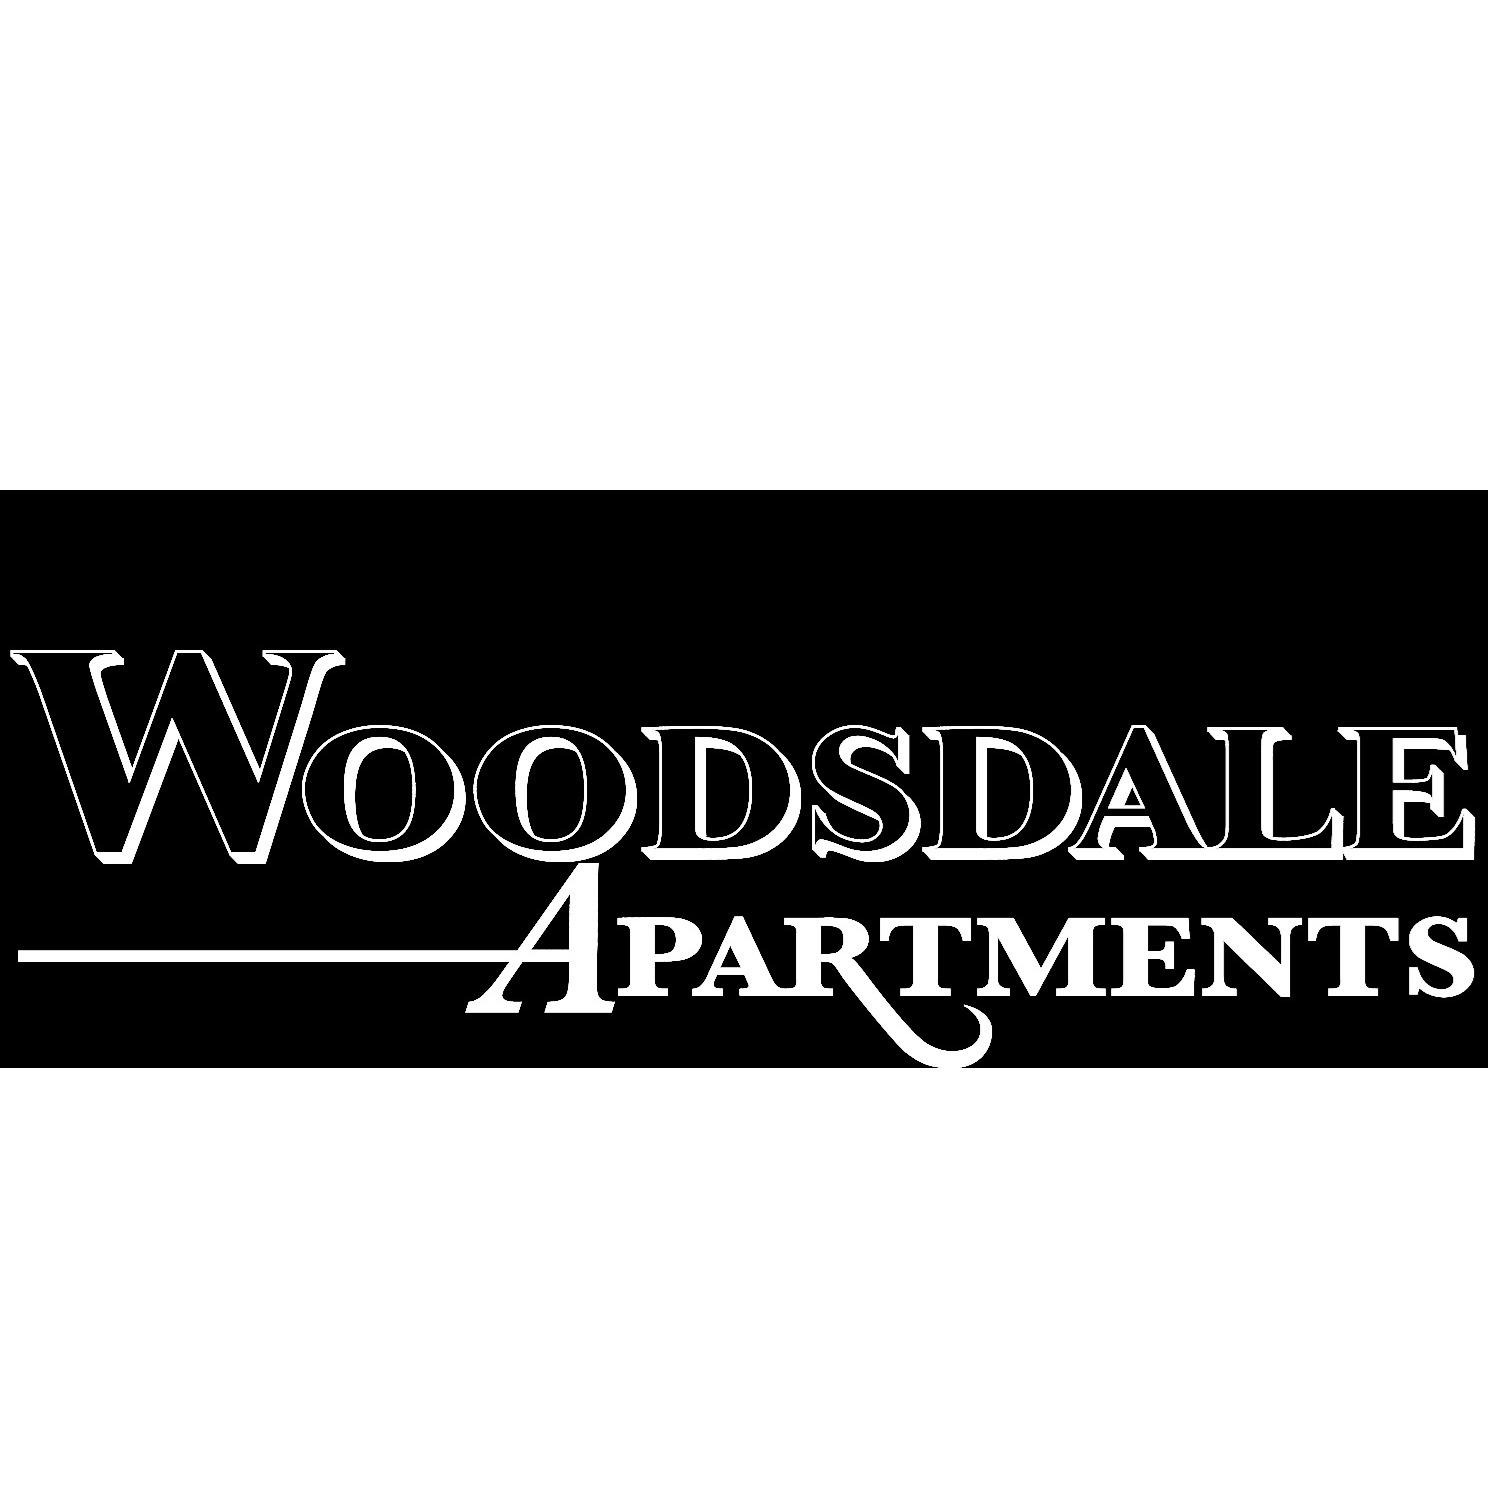 Woodsdale Apartments - Abingdon, MD 21009 - (410)515-2700 | ShowMeLocal.com